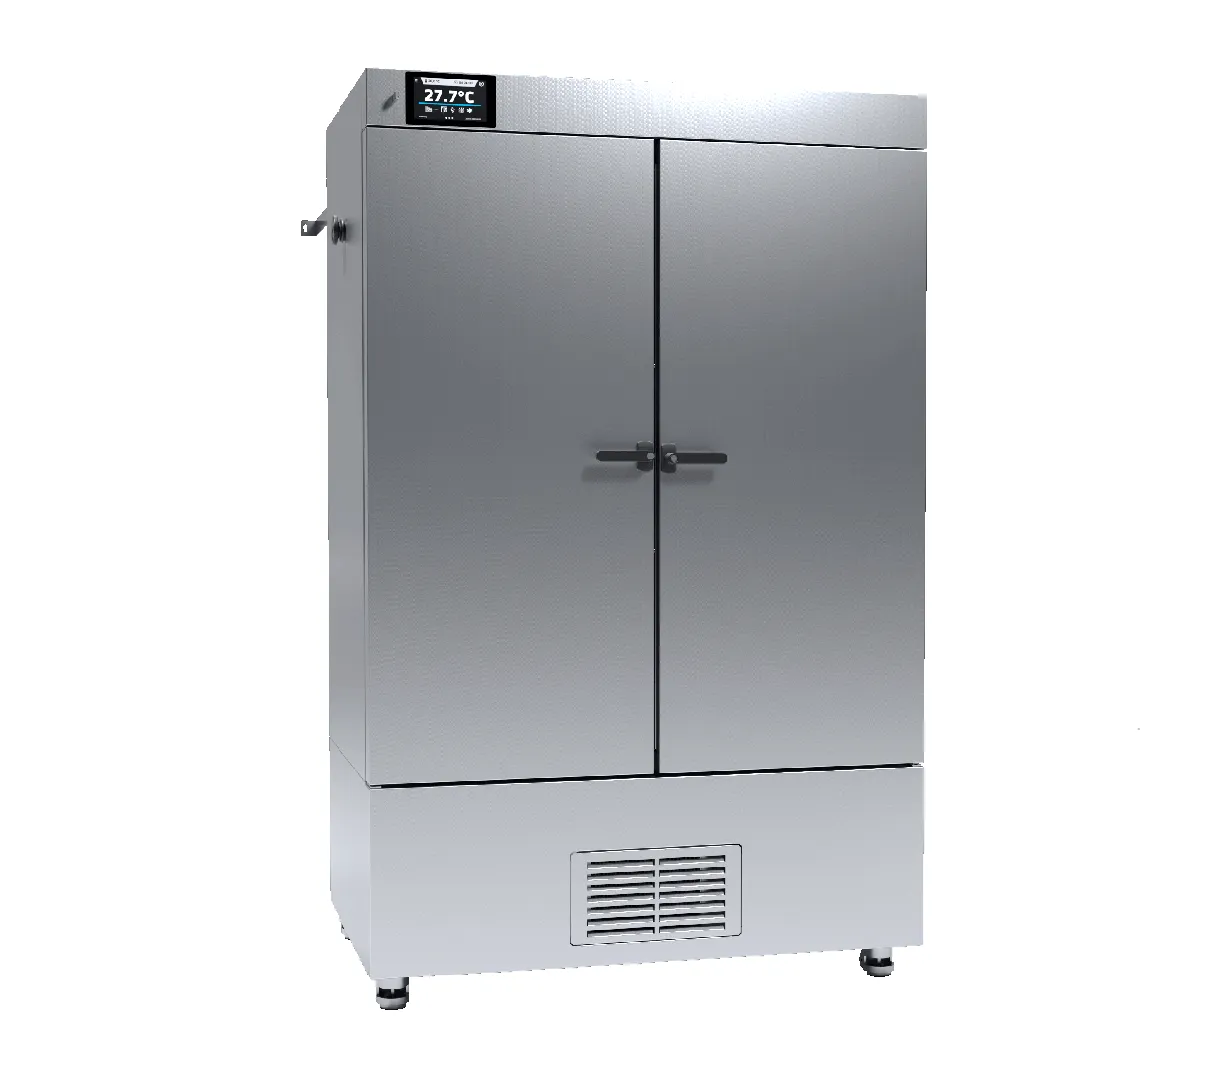 climatic-chamber-with-phytotron-system-kk-fit-p-750-smart-pro-inox-c-1.webp